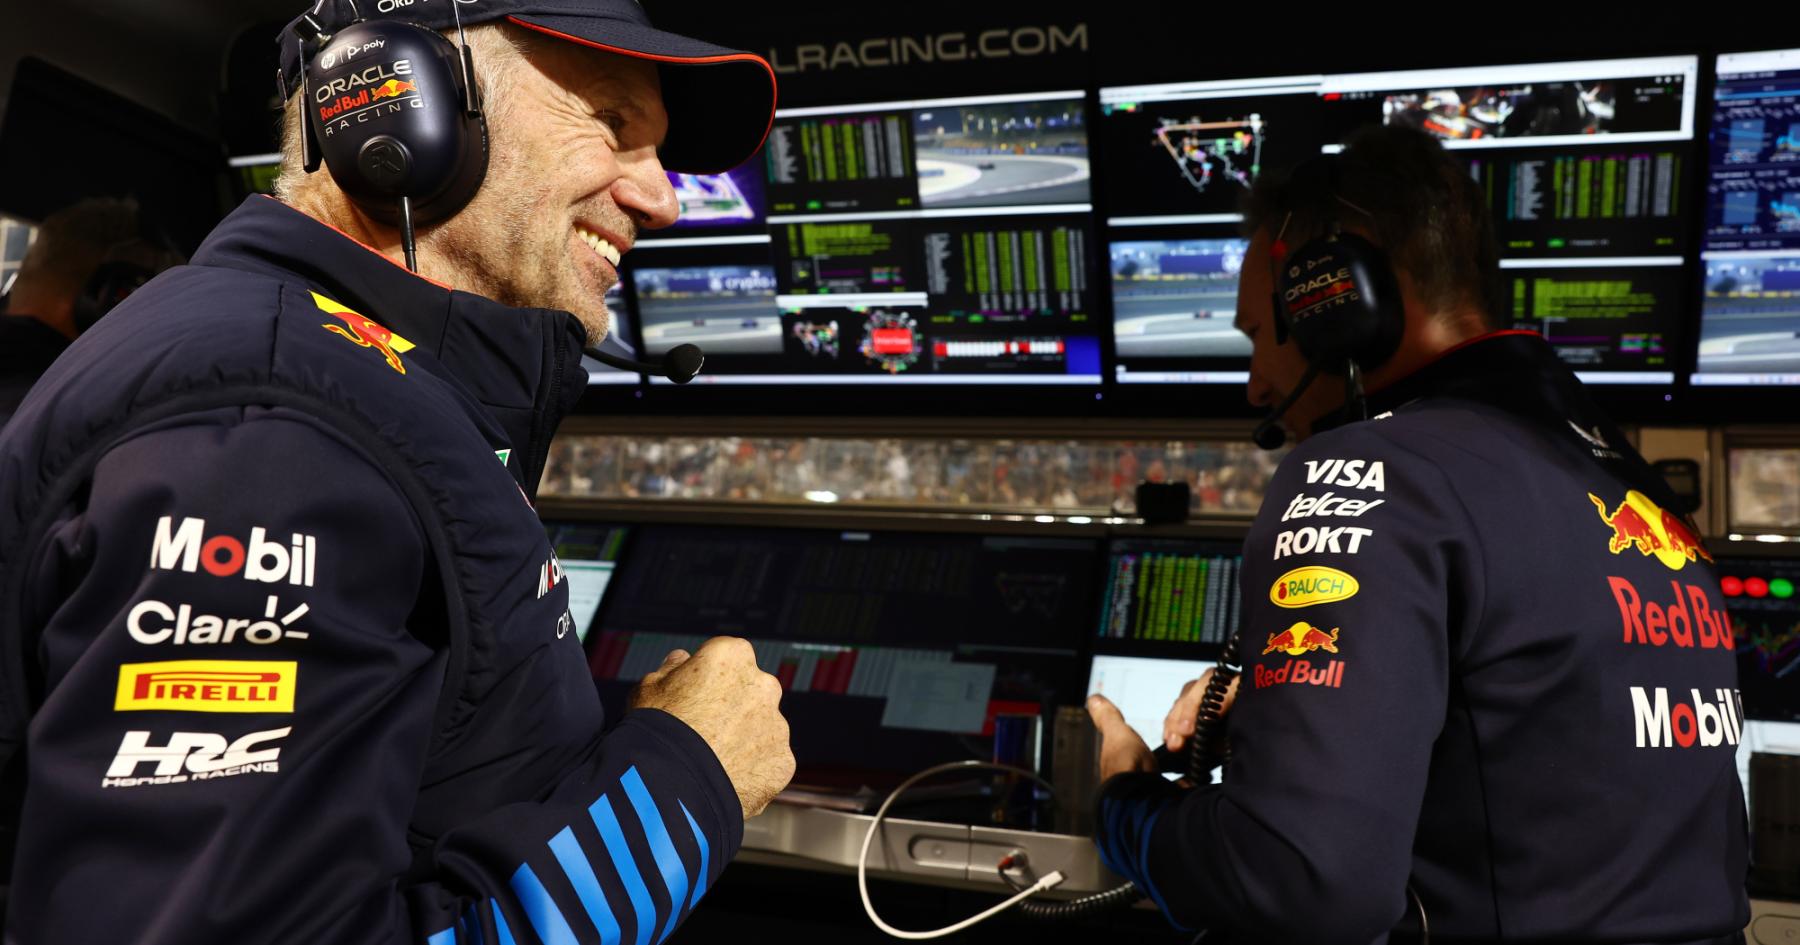 Exclusive Report: Legendary Designer Adrian Newey Uncovers 'Hidden' Formula 1 Issue Revealing Team's Struggle to Maintain Superiority